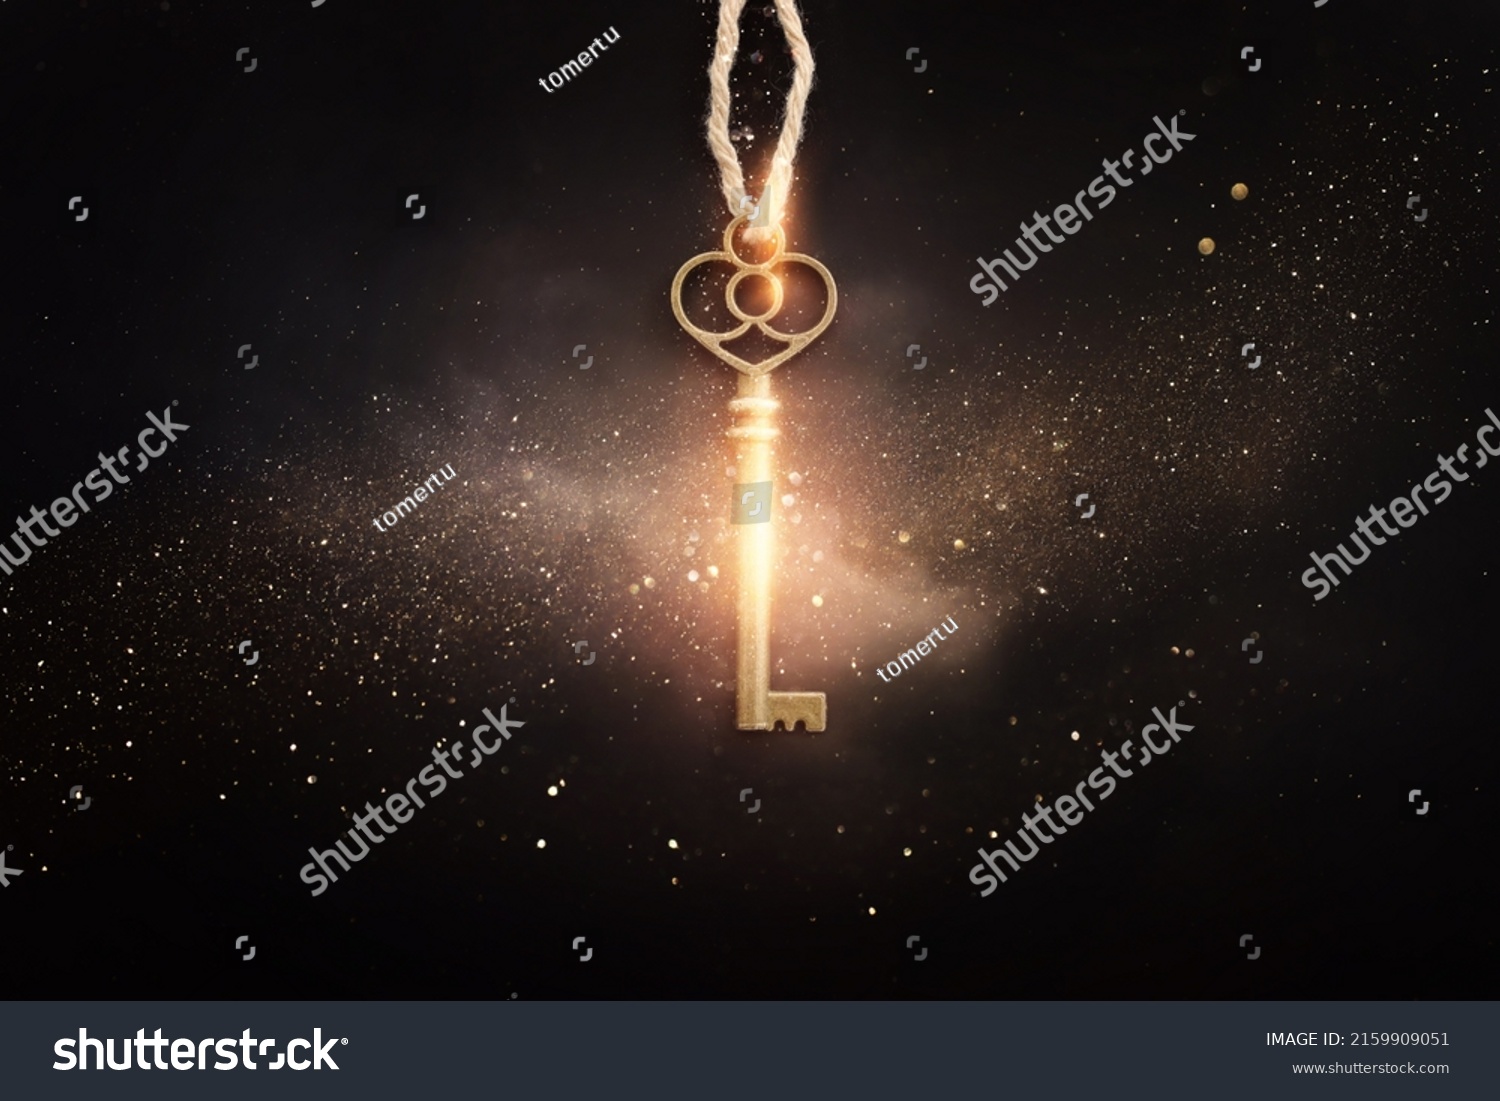 Golden key with glowing lights and dark background, wisdom, wealth, and spiritual concept #2159909051